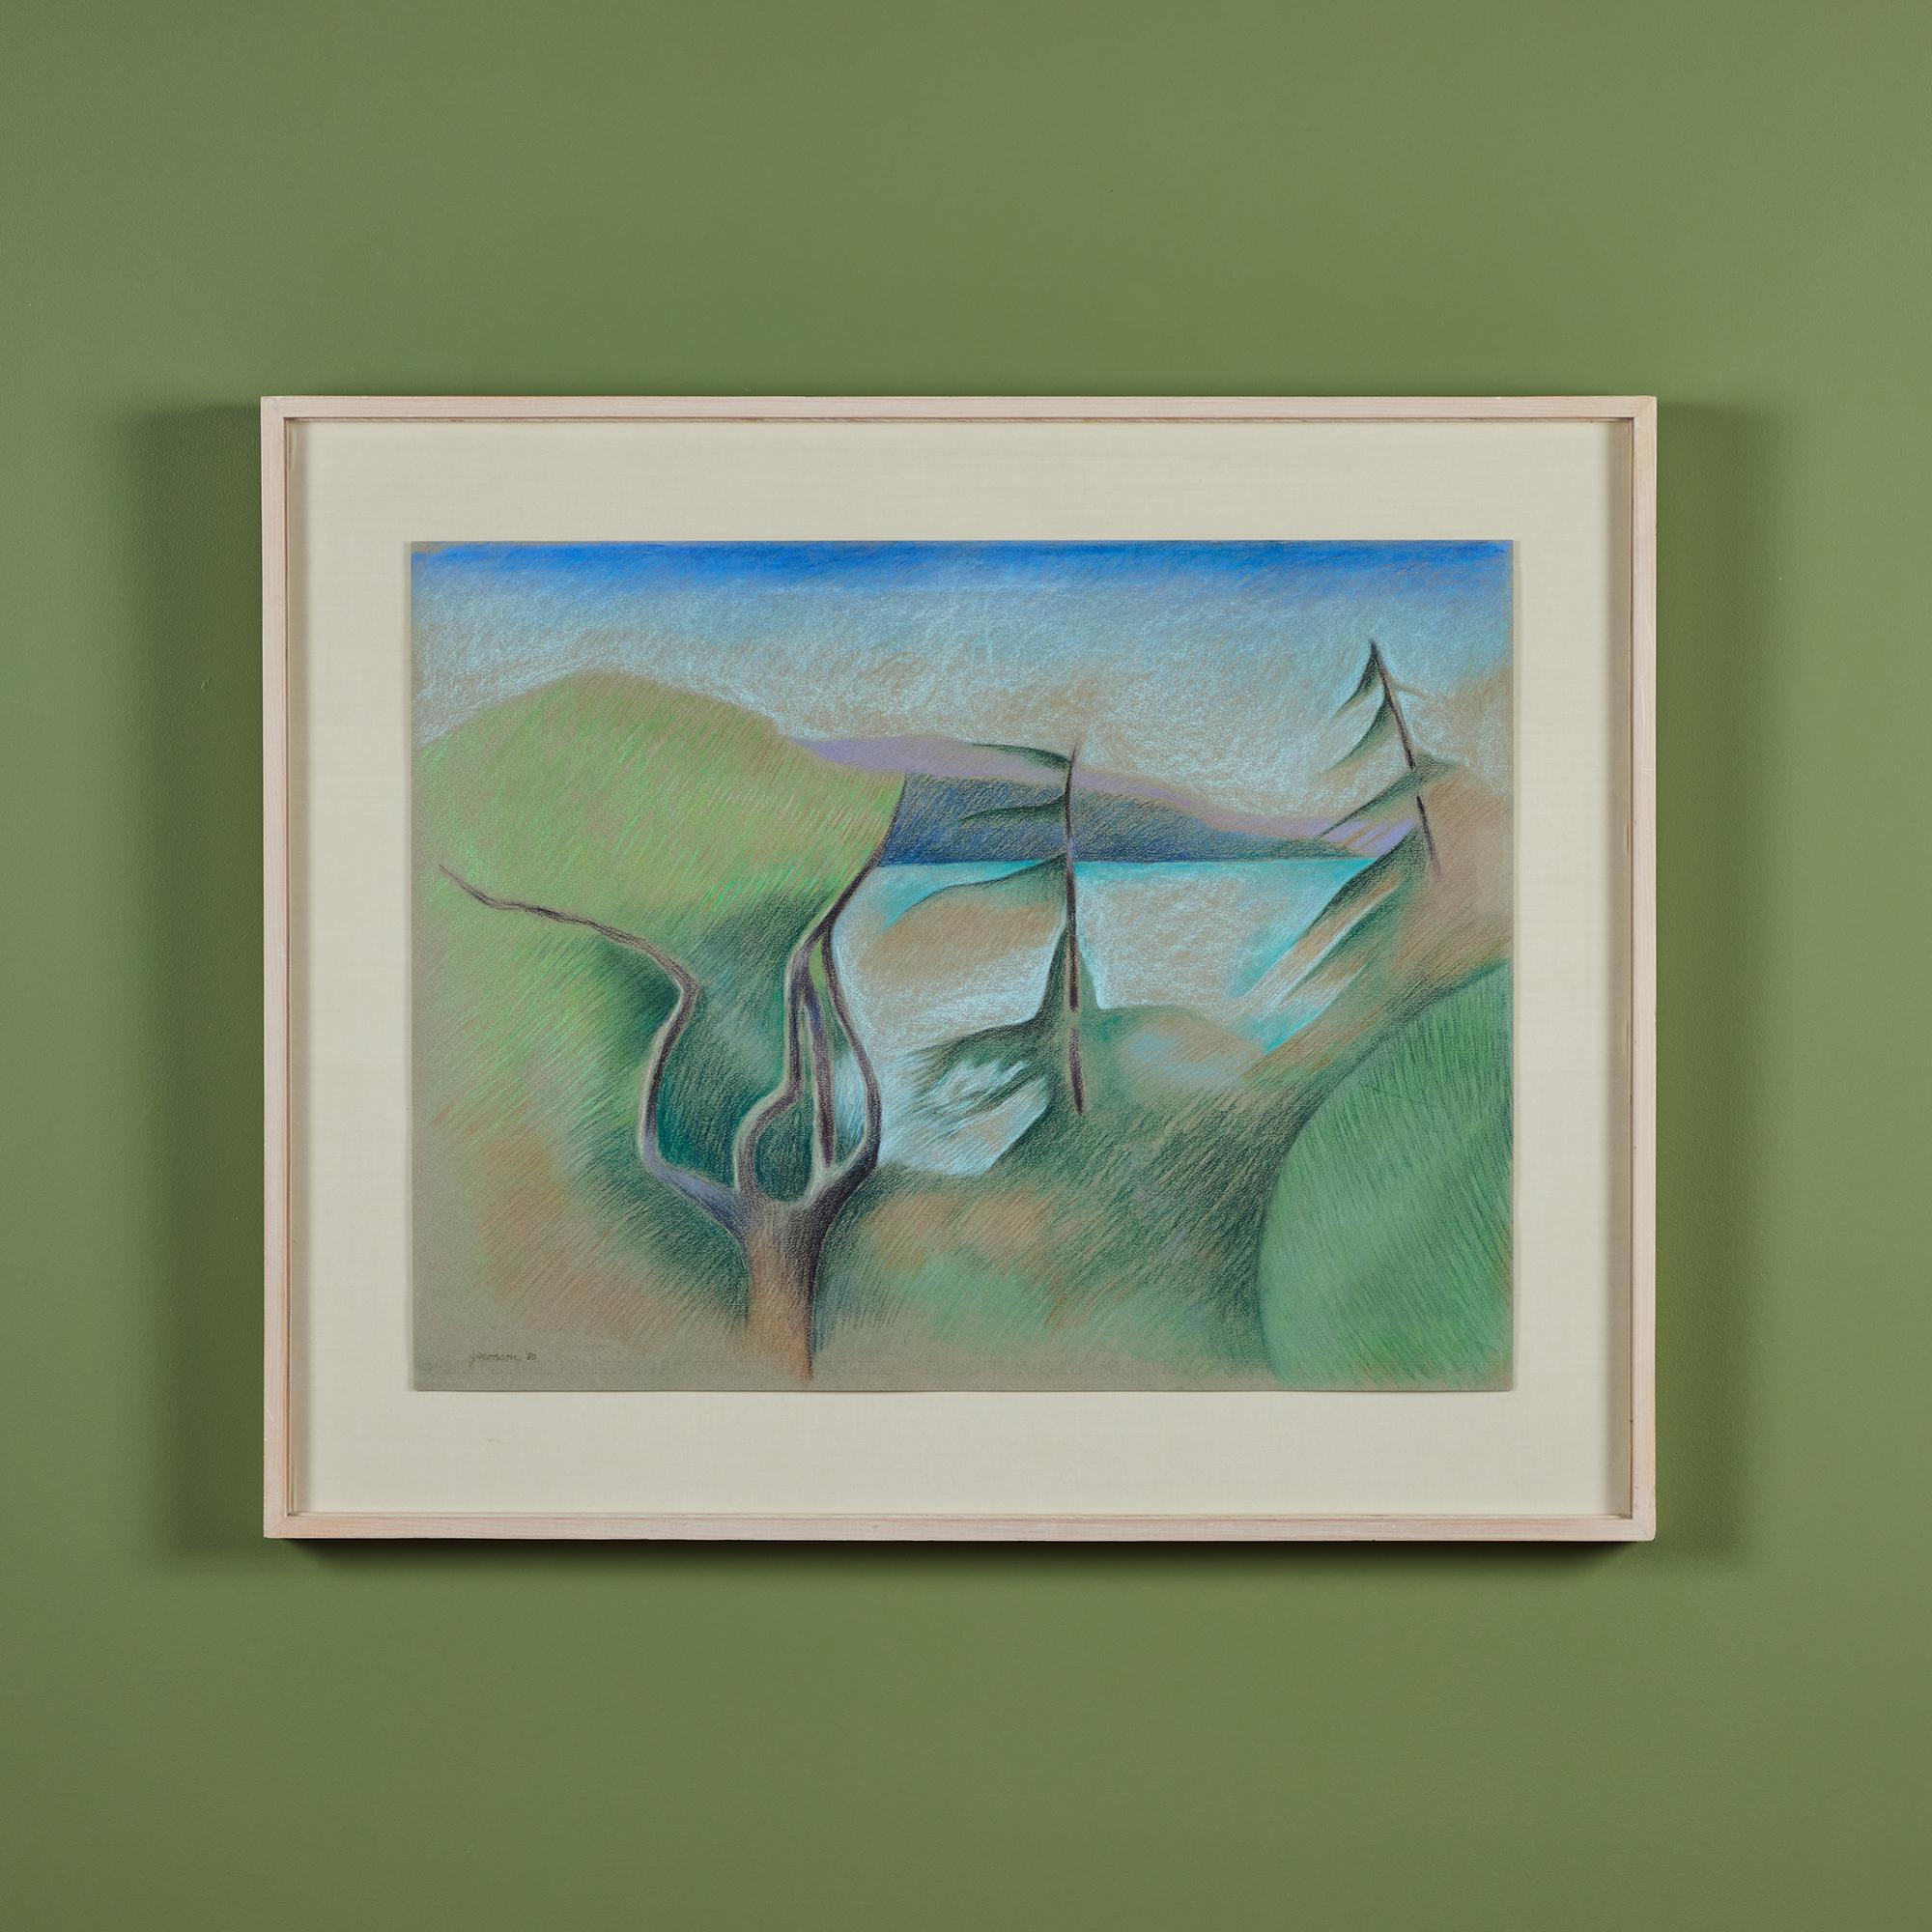 Framed pastel painting by American artist, Linda Jacobson, c.1980. The landscape artwork portrays trees, water and green rolling hills. The mood of Jacobson's work is often peaceful and reflects her love of nature and its elements.
Signed by the